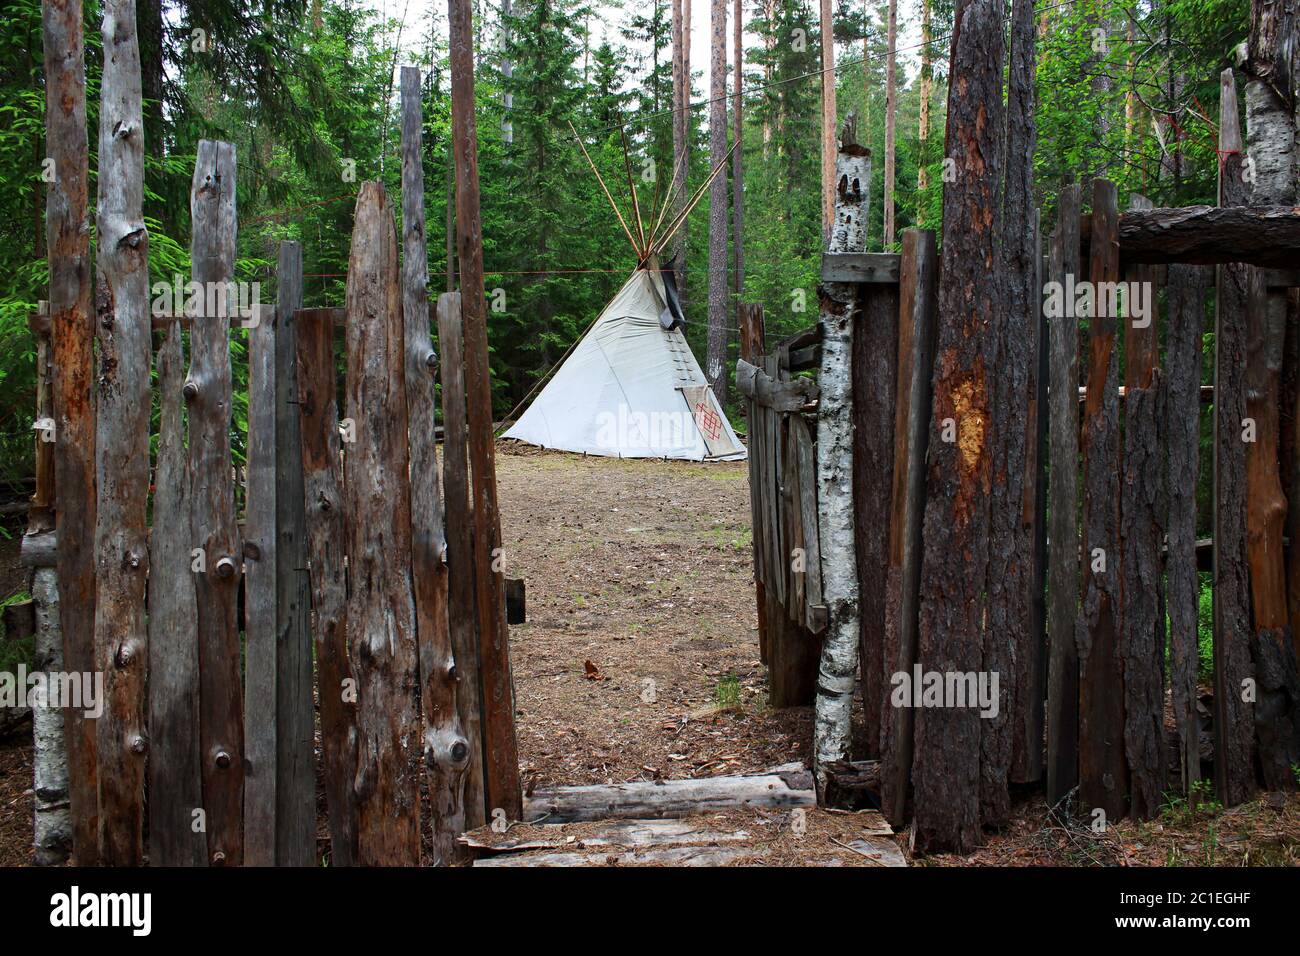 wigwam or teepee standing in summer coniferous forest. fence of boards and wood bark. Stock Photo